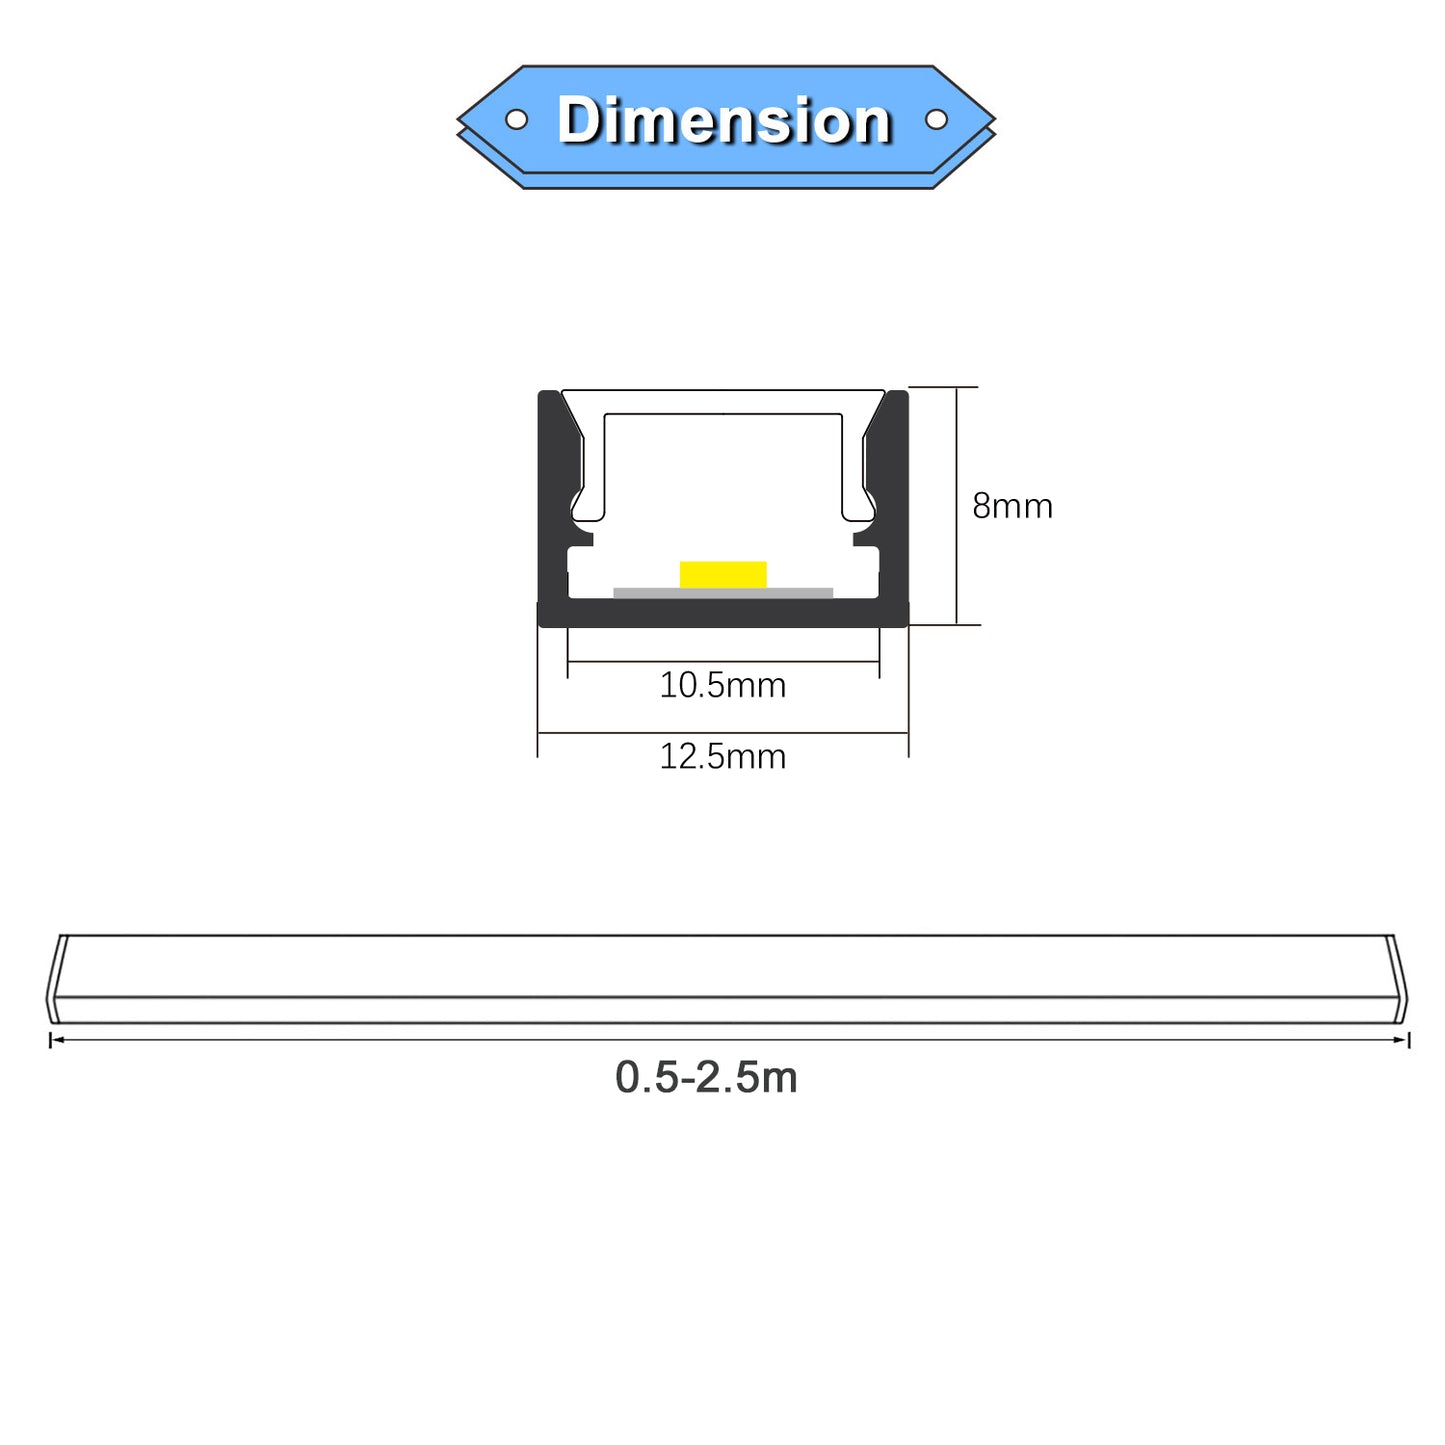 Send an inquiry for  LED Diffuser Channel High Quality AL6063 LED Light Strip Profile for Mood Lighting to high quality LED Light Strip Profile supplier. Wholesale LED Diffuser Channel directly from China  LED Light Strip Profile manufacturers/exporters. Get a factory sale price list and become a distributor/agent-vstled.com